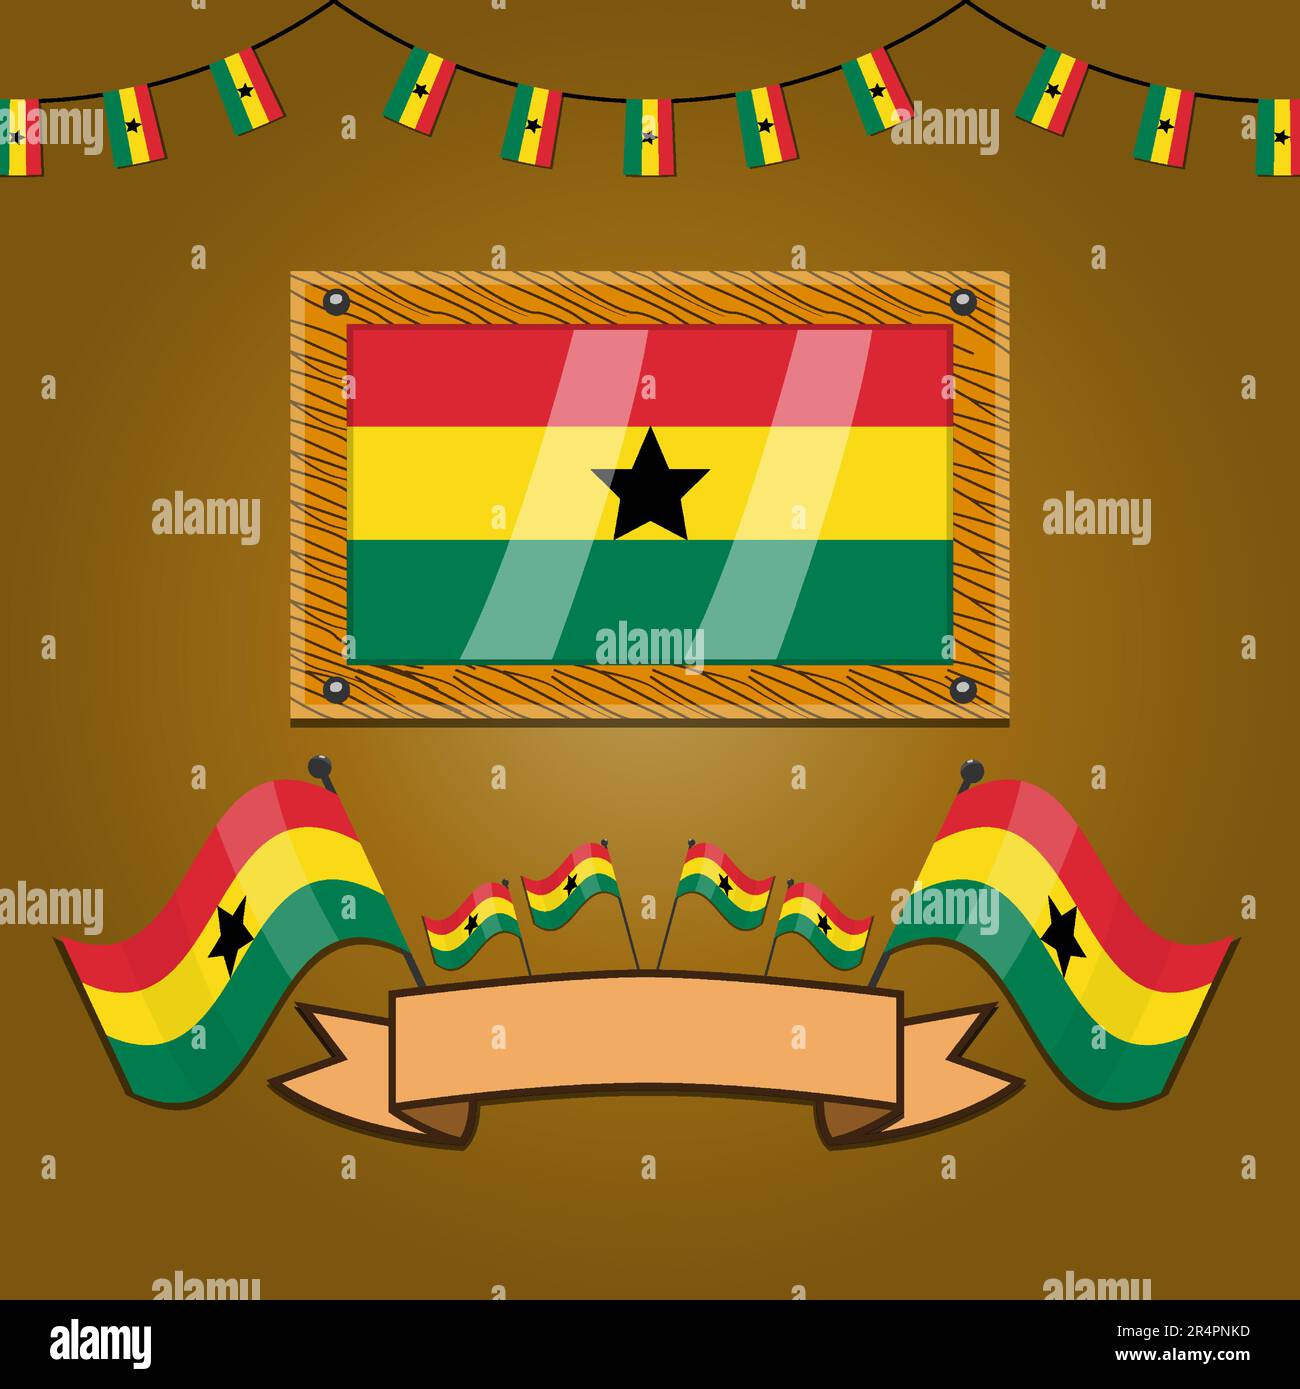 Ghana Flags On Frame Wood, Label, Simple Gradient and Vector Illustration Stock Vector